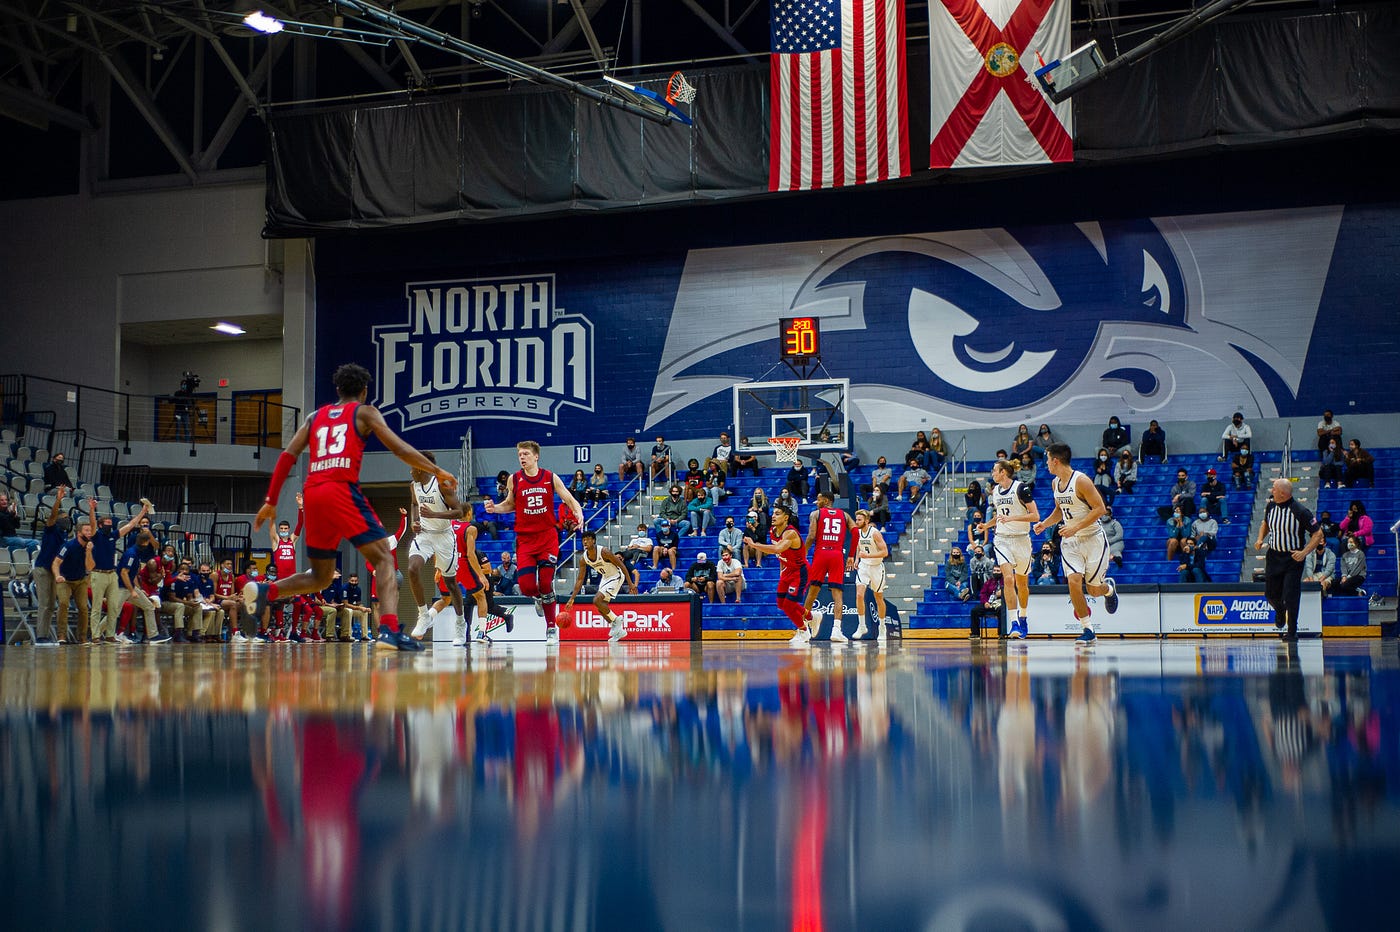 UNF Ospreys Men’s Basketball playing the FAU Owls on December 7, 2020